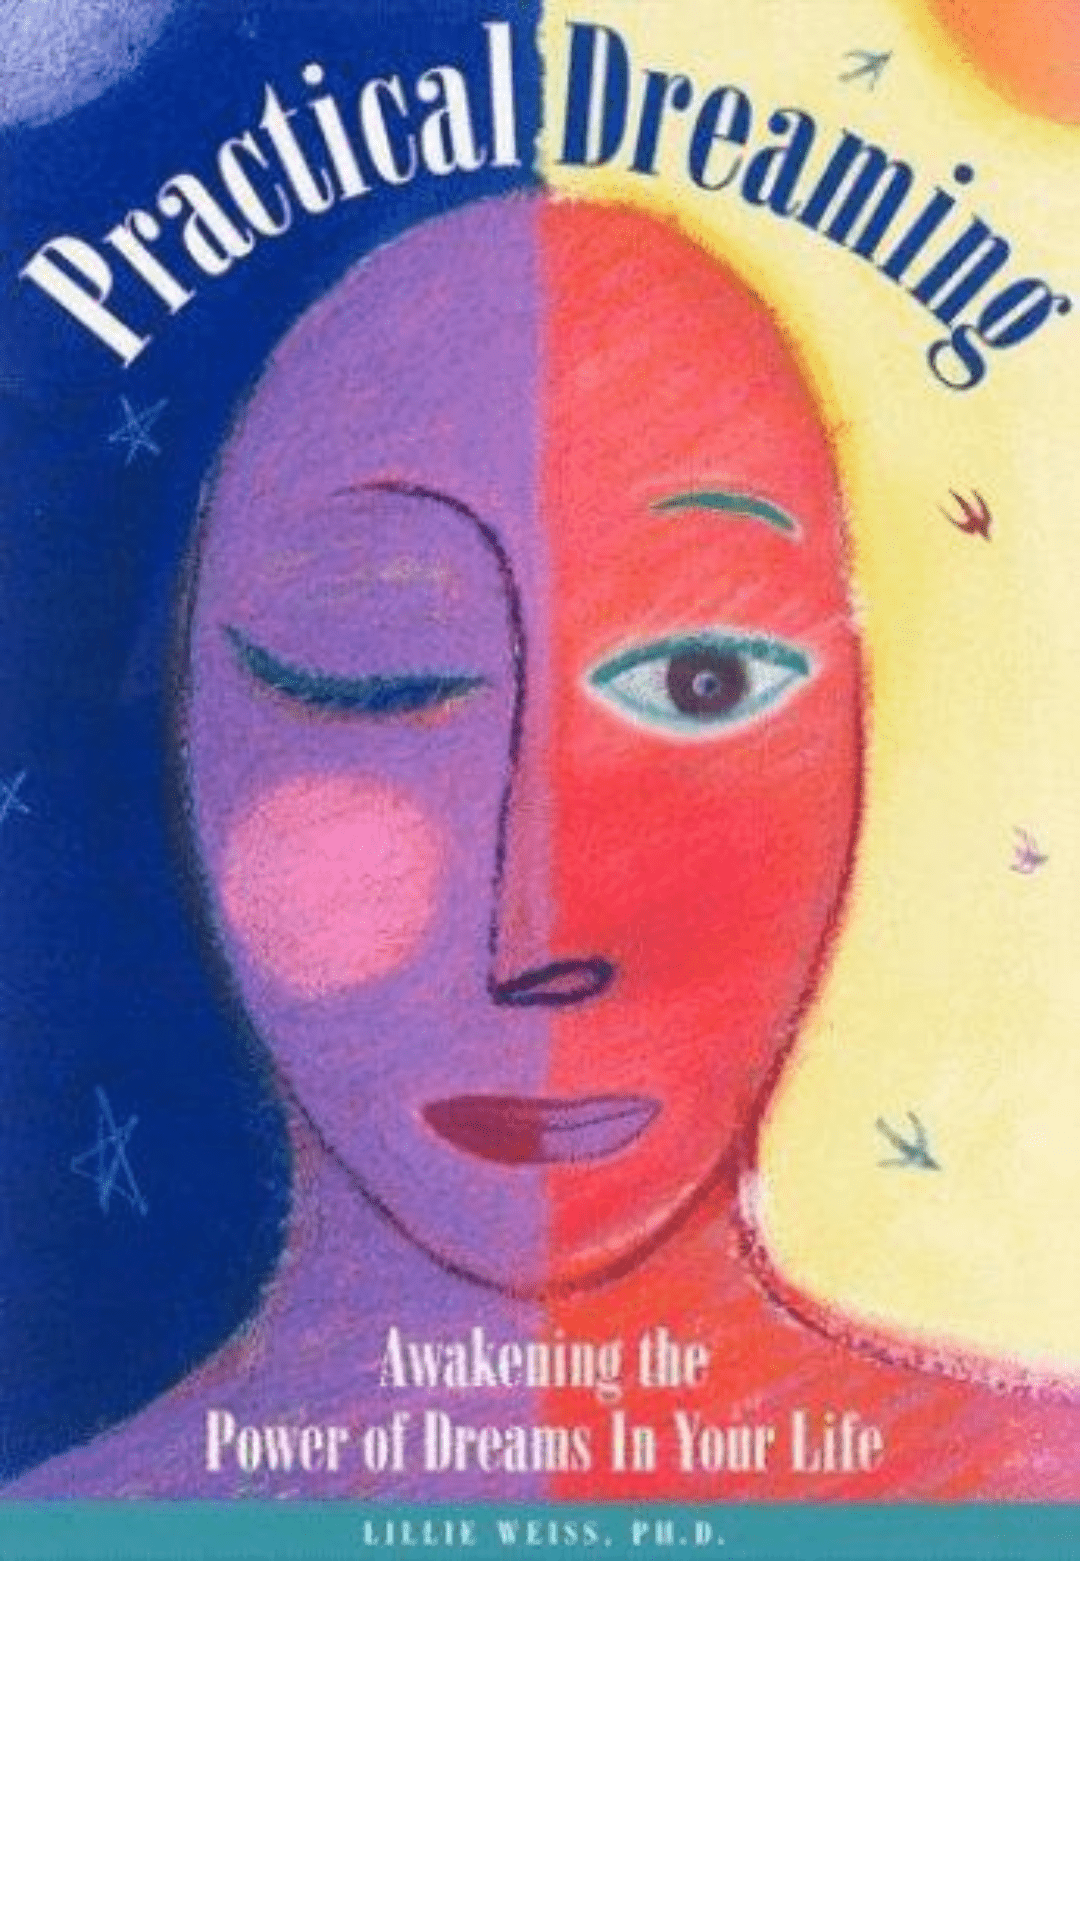 Practical Dreaming: Awakening the Power of Dreams in Your Life